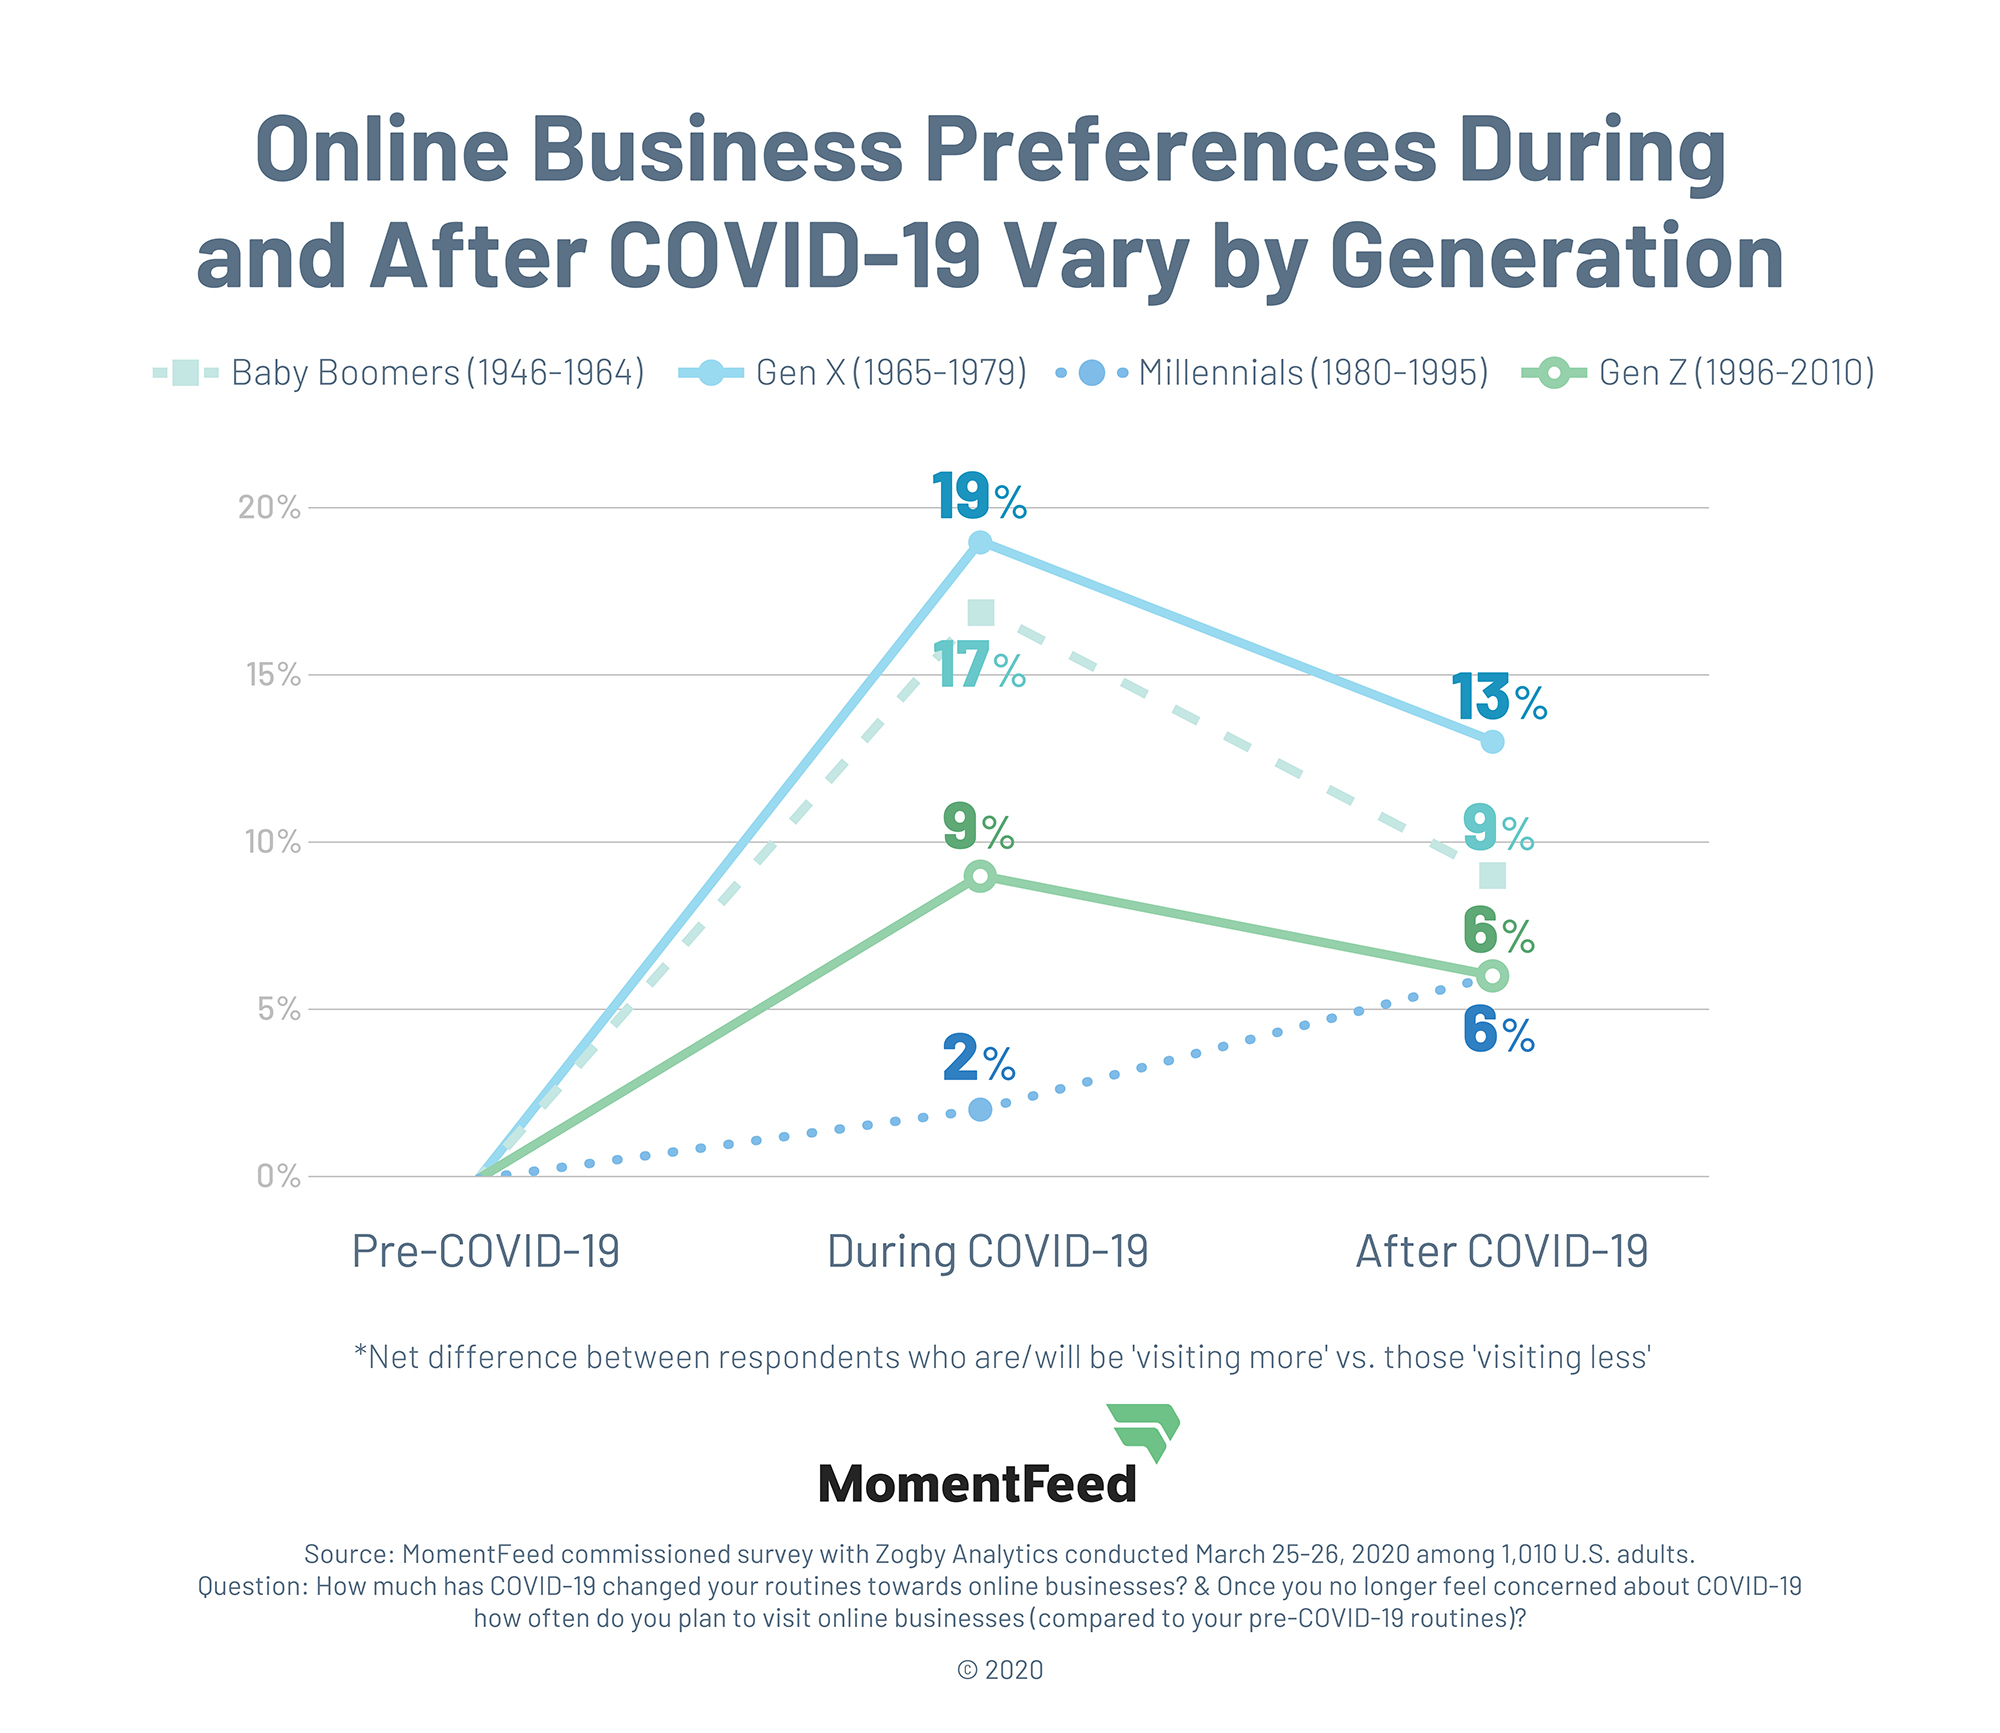 Generation X is most open to trying new ways of interacting with businesses online during COVID-19. Our survey also suggests online behavior may be lasting among this generation.